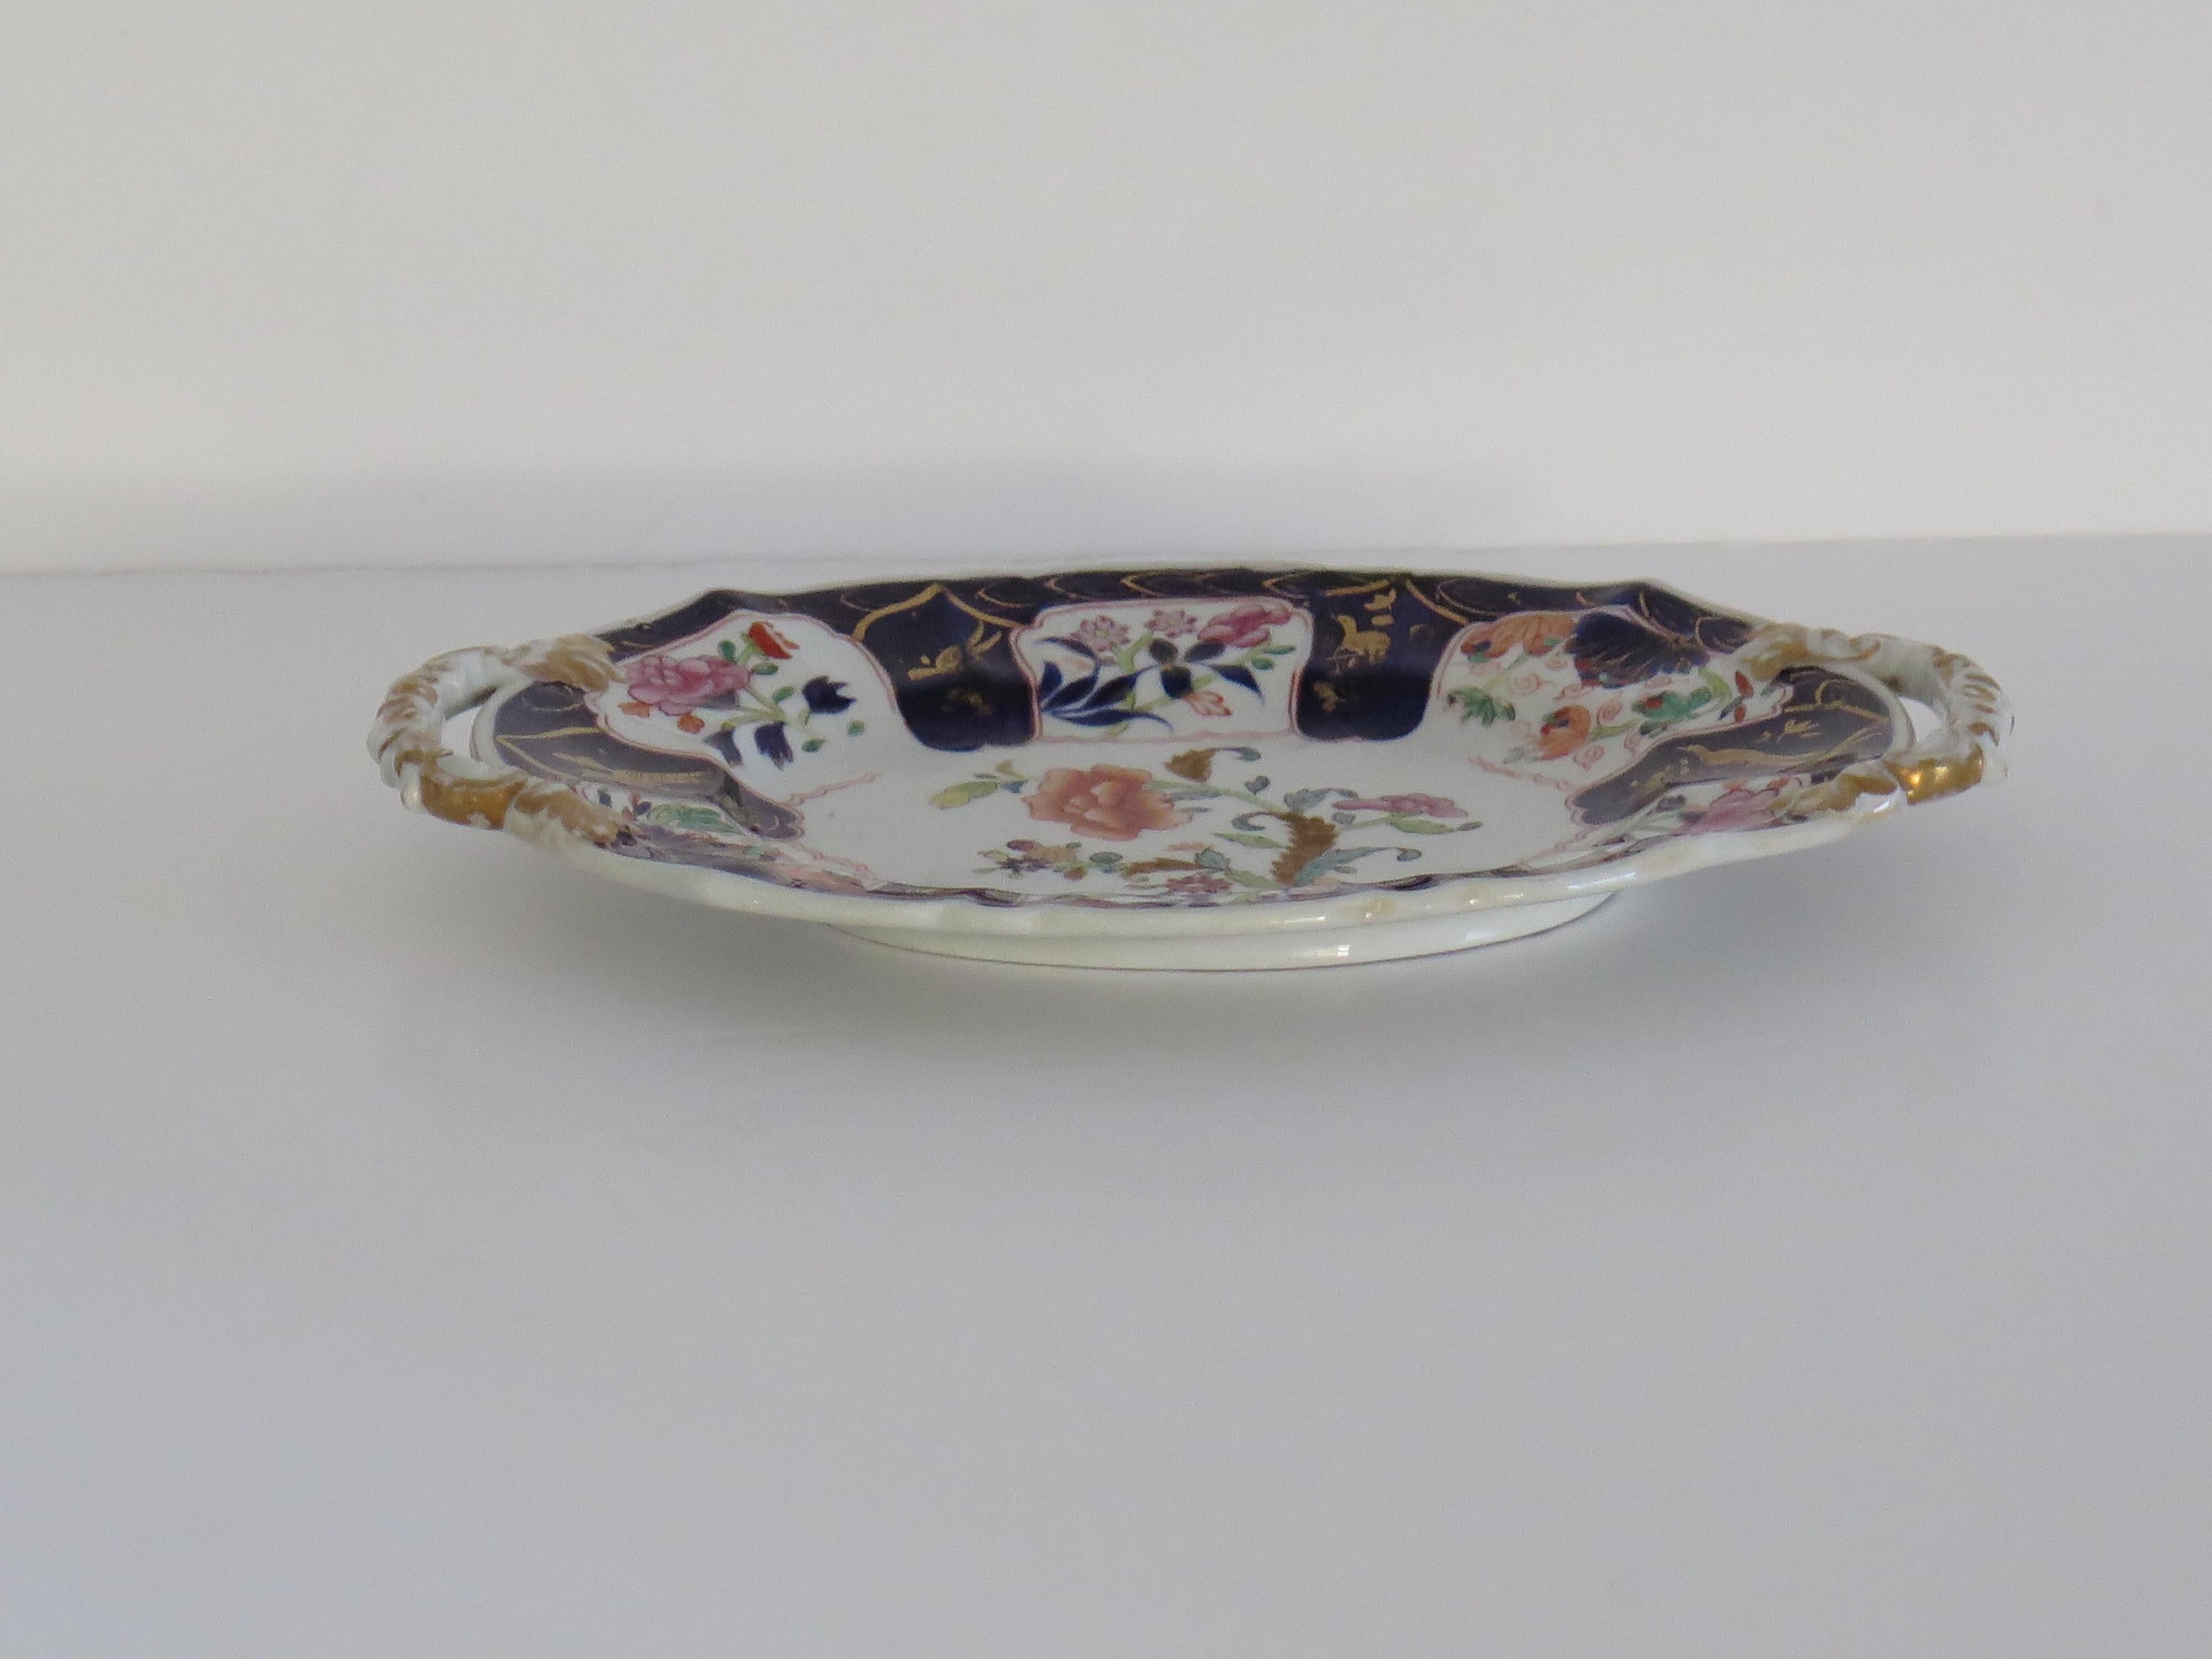 Chinoiserie Masons Ironstone Oval Platter in Gold Pheasants Peony & Fern pattern, Ca 1820 For Sale